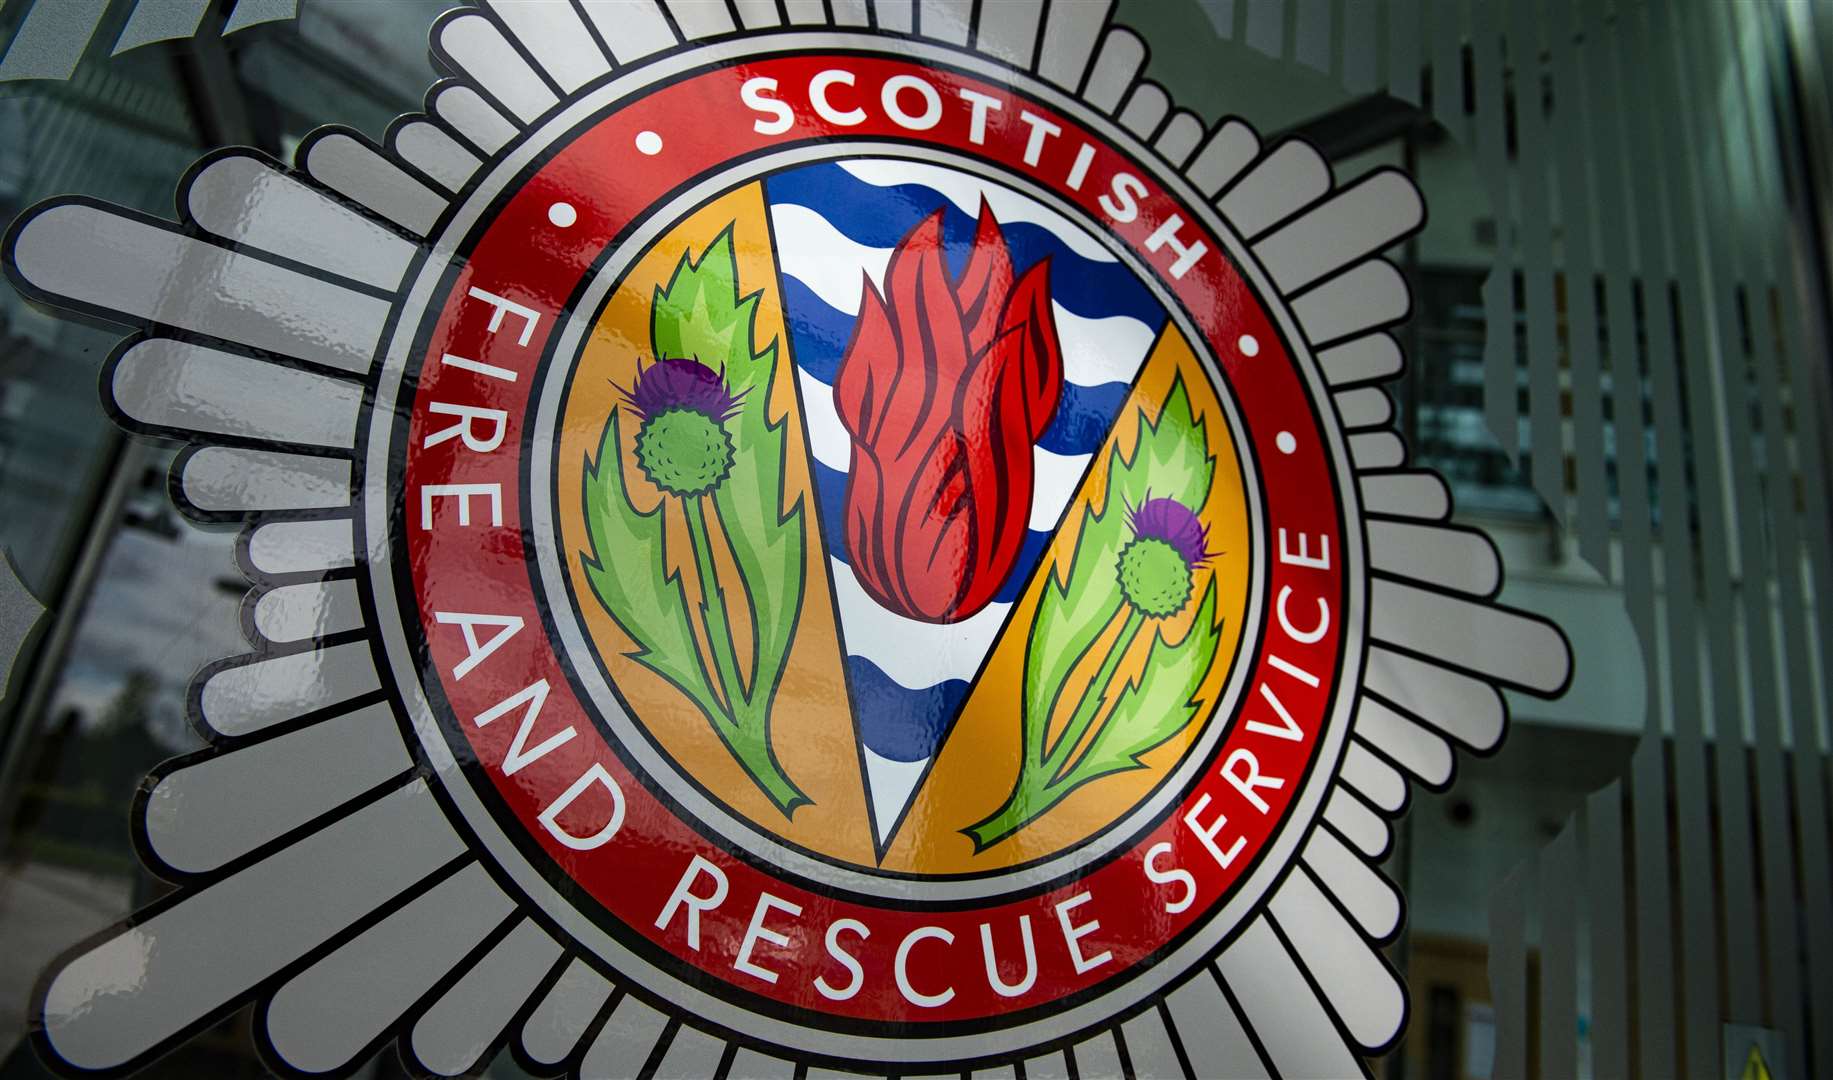 SFRS received more than 900 emergency calls on Friday.